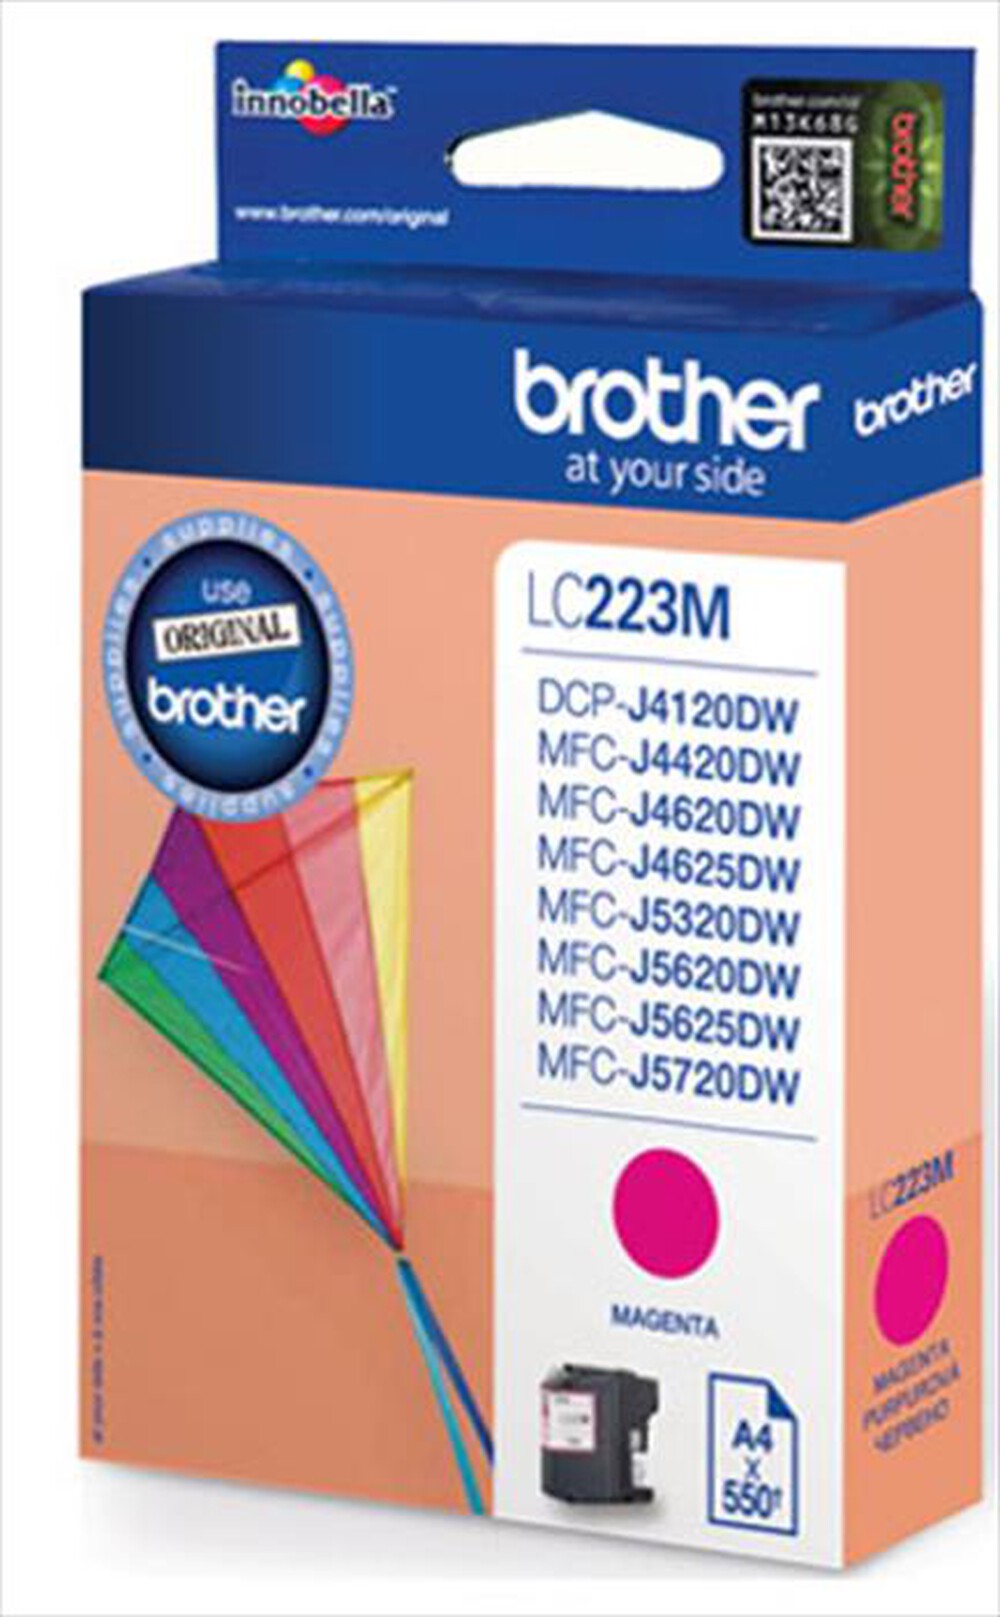 "BROTHER - LC223MBP"